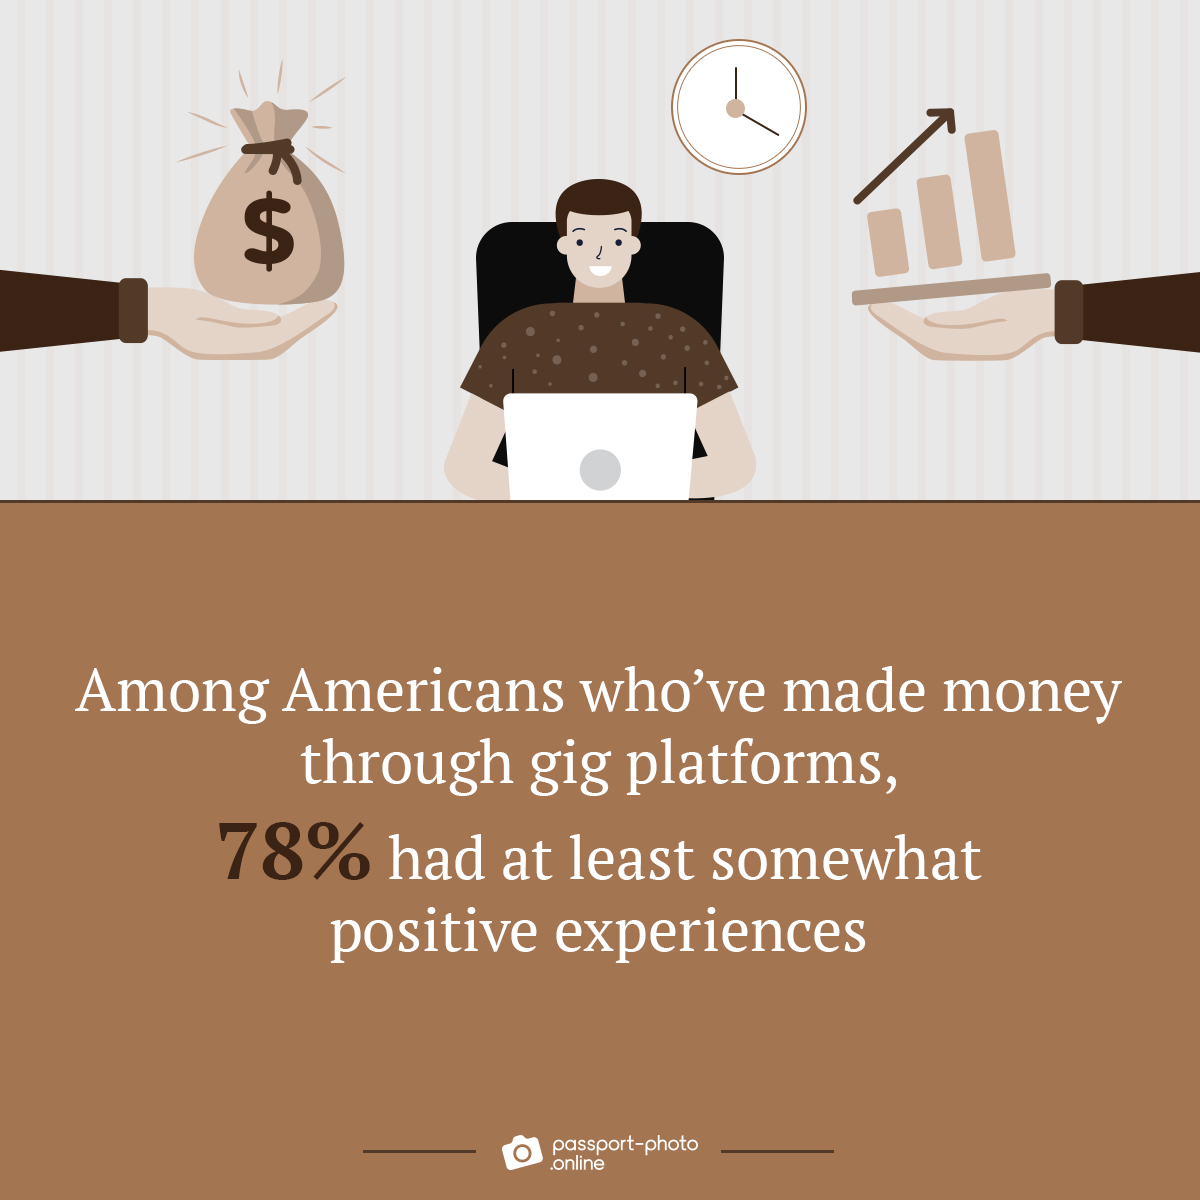 78% of American gig platform earners had positive experiences, with 24% rating it as very positive